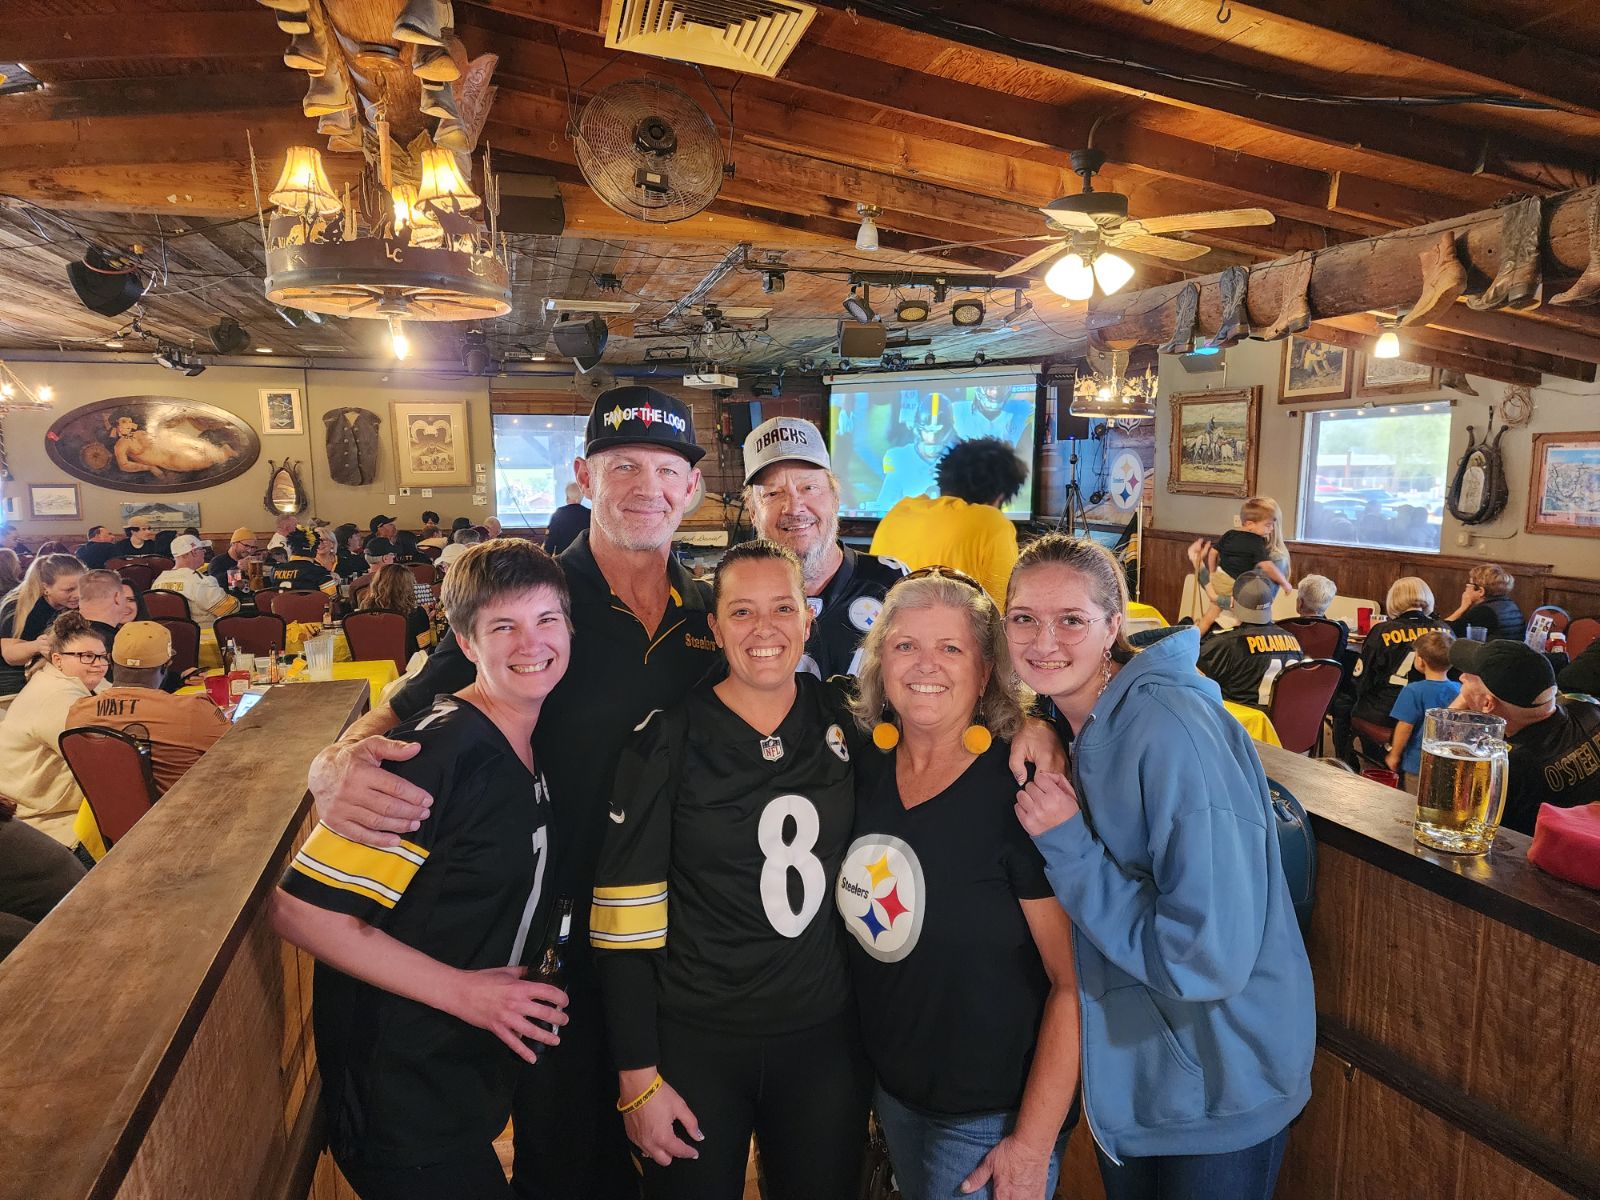 Merril Hoge and winner of Legends of Pittsburgh Cruise at Harold's Corral